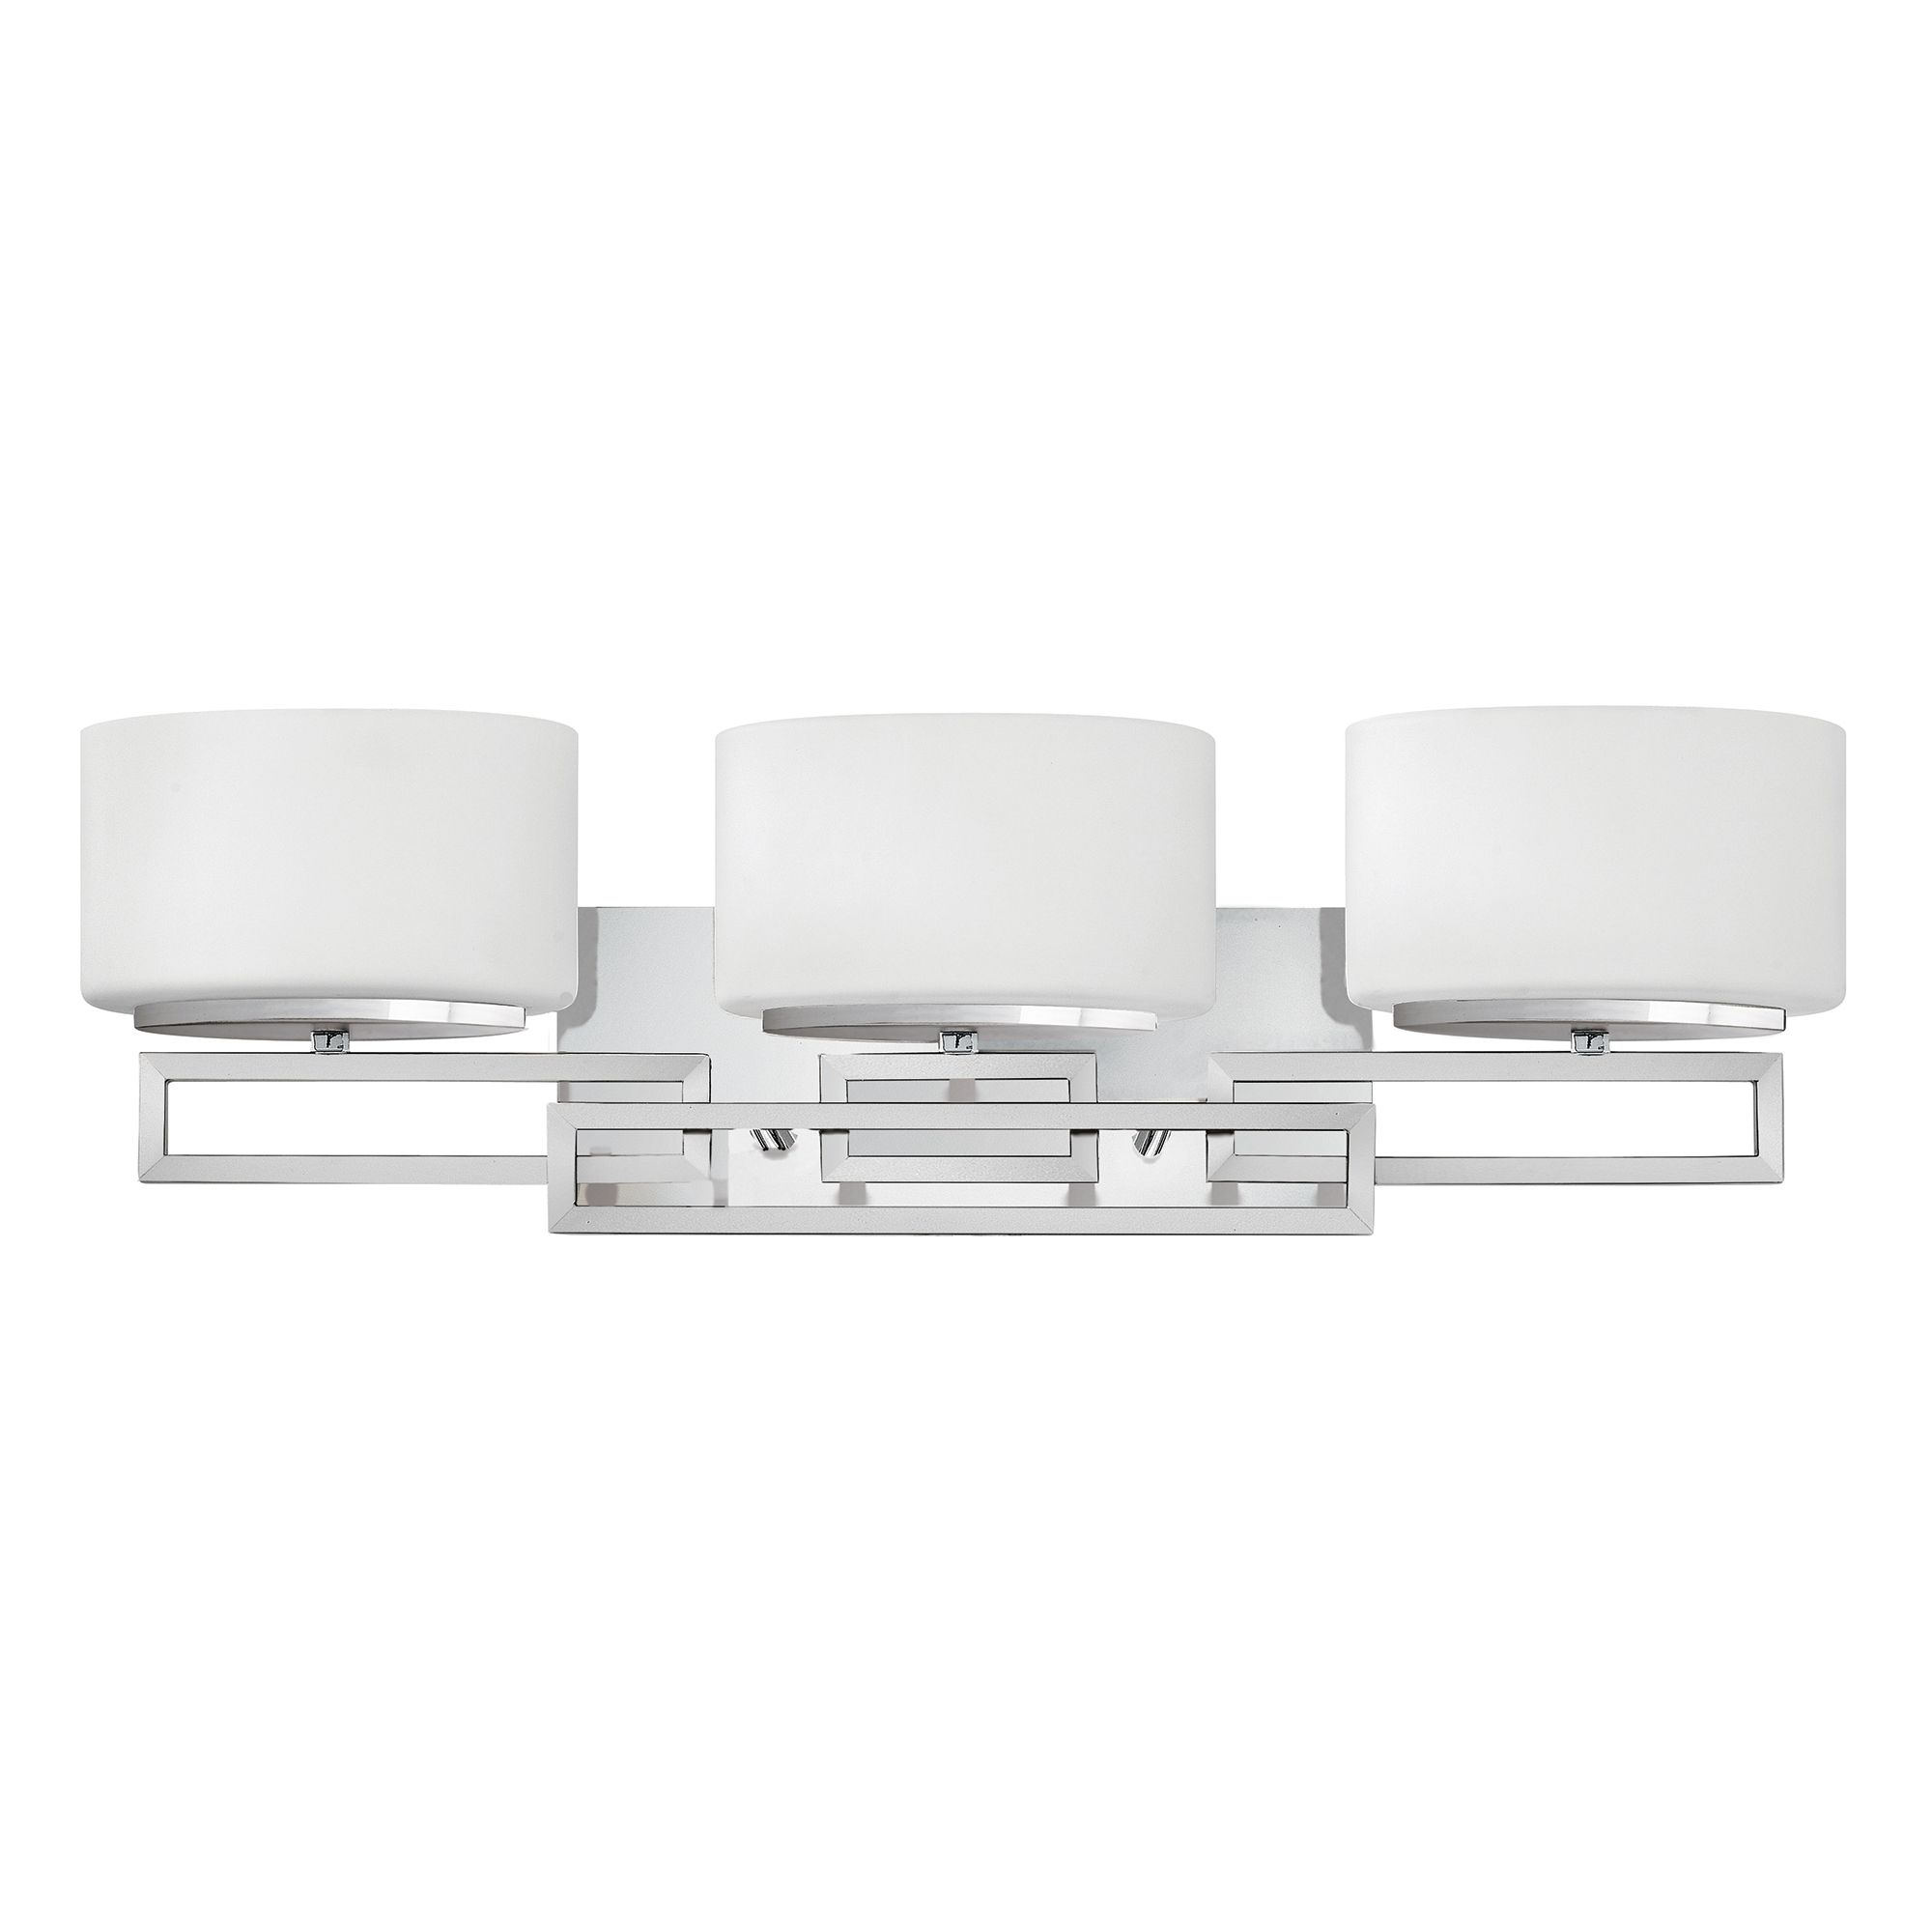 1 ONLY Hinkley Lanza Chrome Triple Above Mirror Wall Light